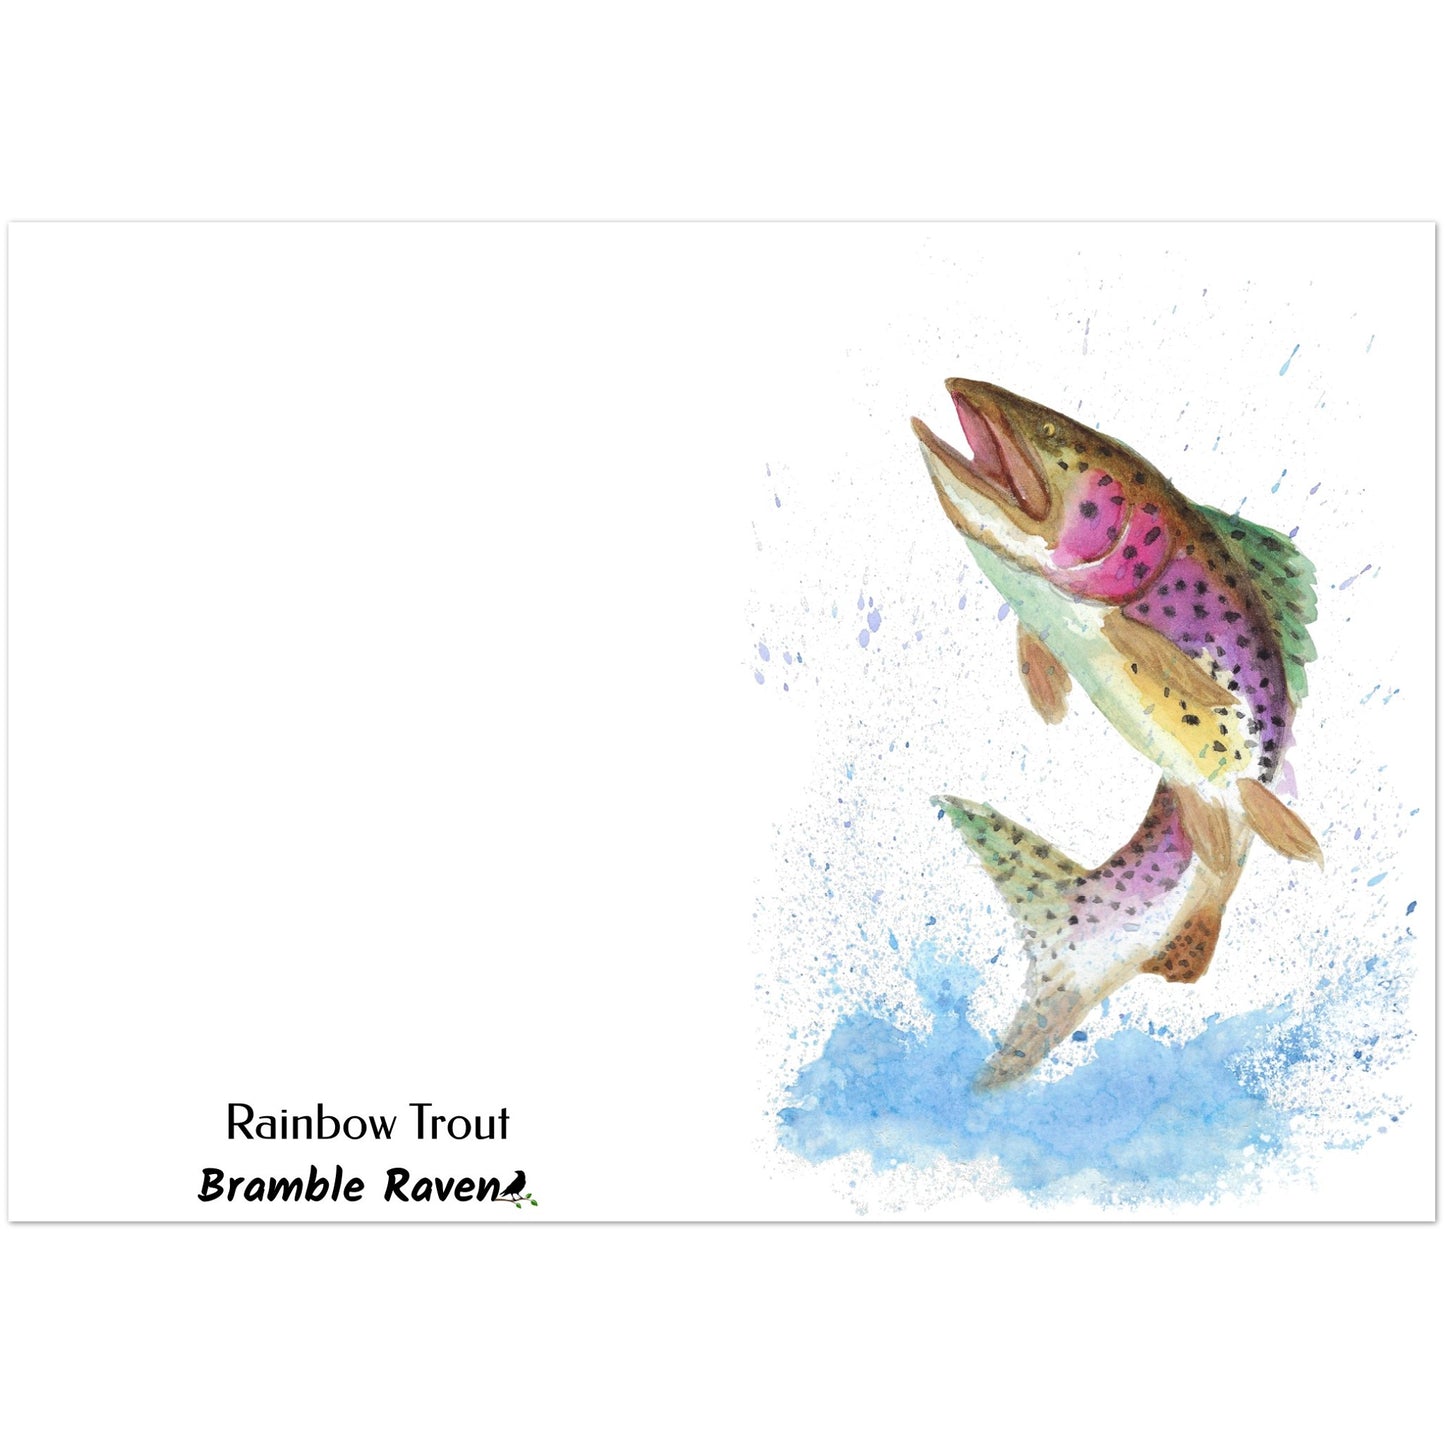 Ten greeting cards with print of watercolor rainbow trout on the front. Inside is blank. Comes with envelopes. Cards measure 5.5 by 8.5 inches. Made with 350 gsm 150lb coated paperboard with vibrant printing.